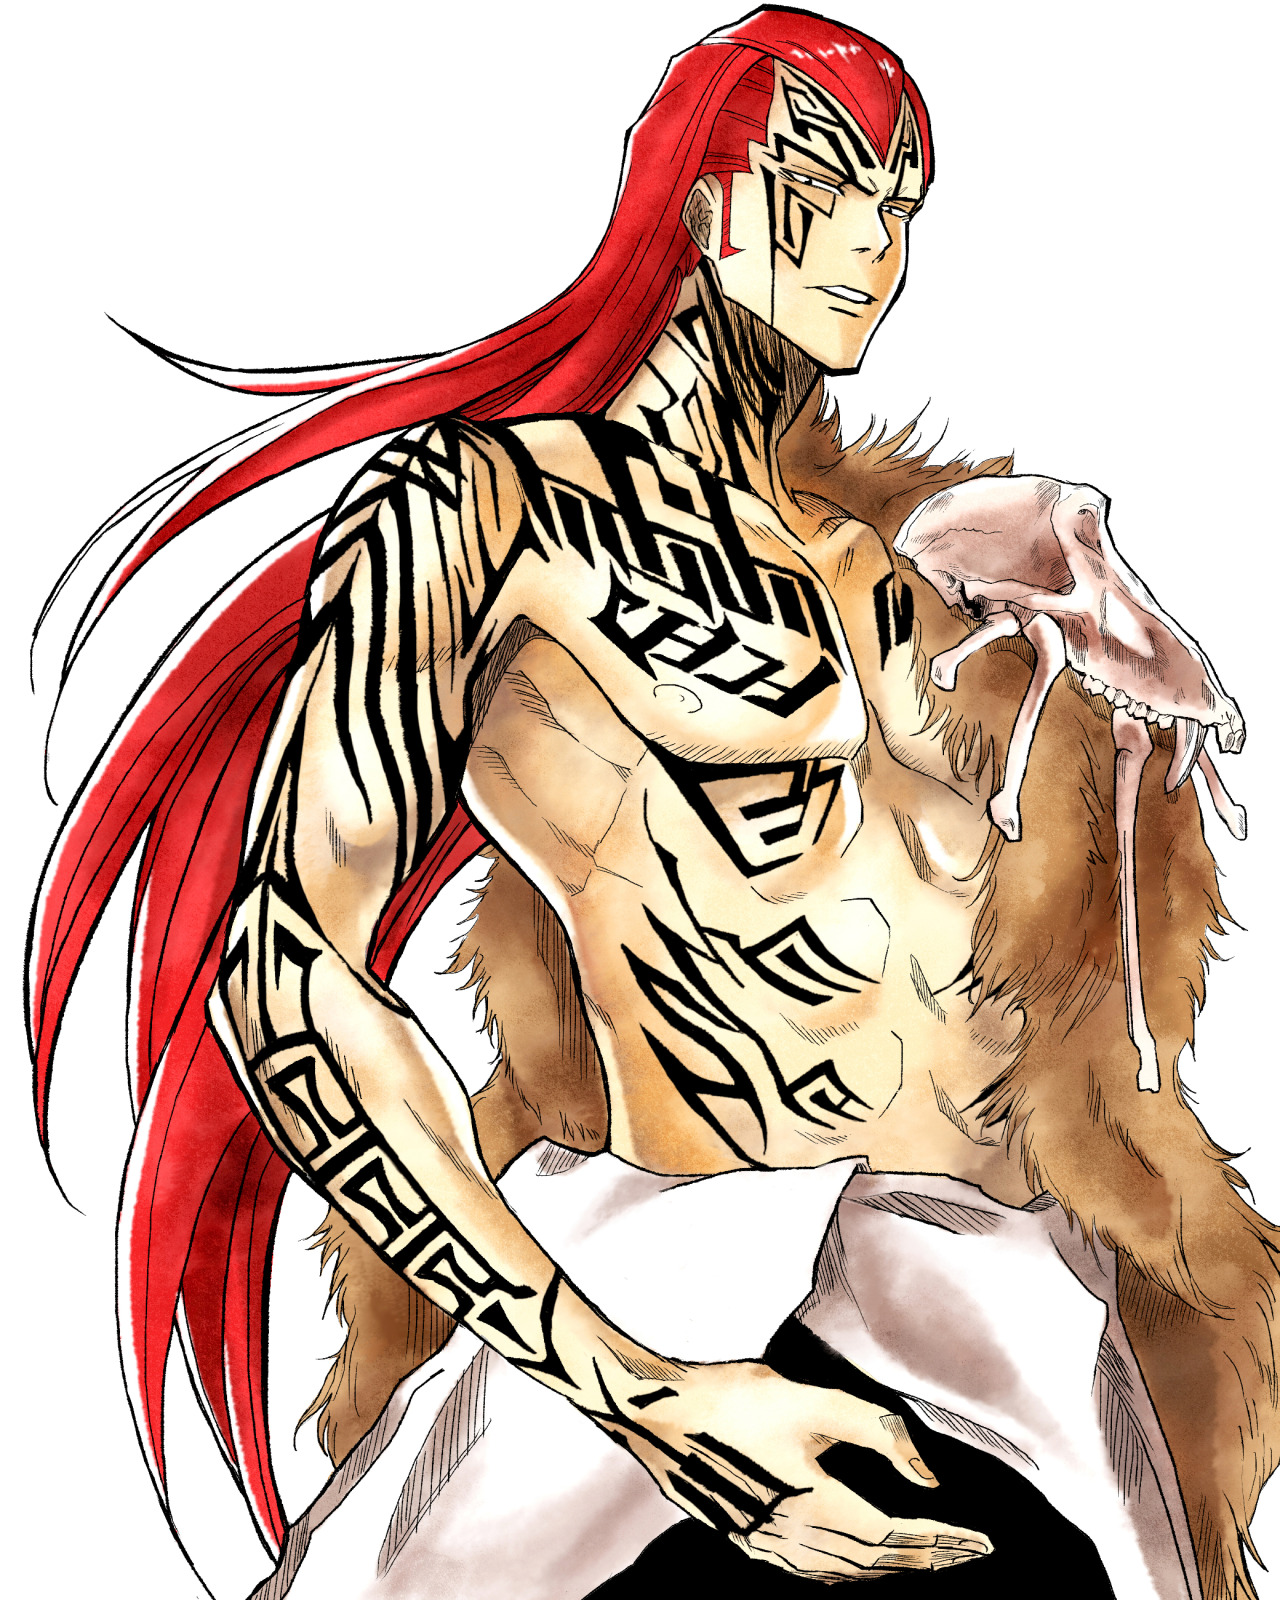 silverwood. — One of the things I would've liked is for Renji to...